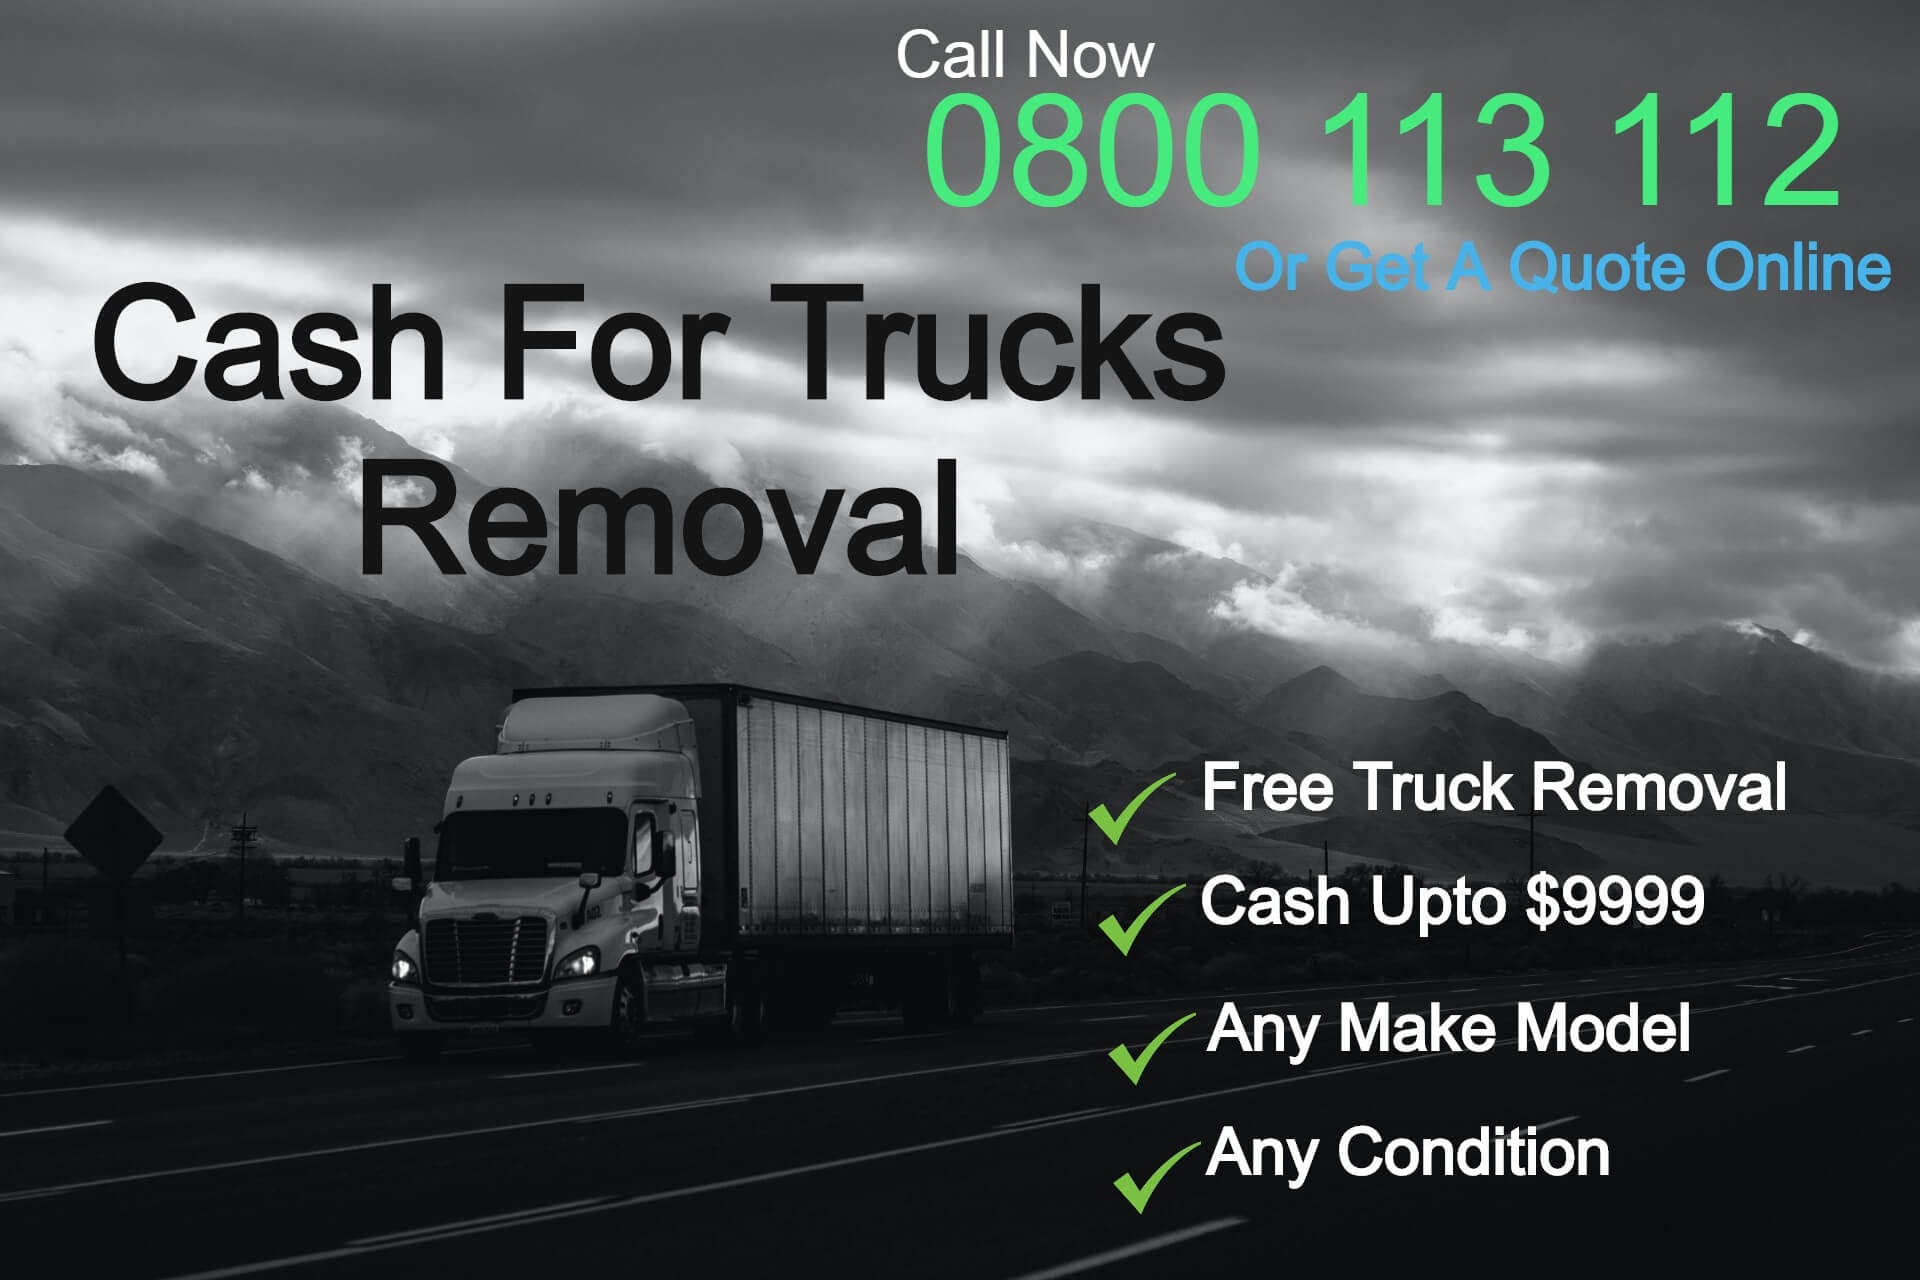 Truck Removal NZ